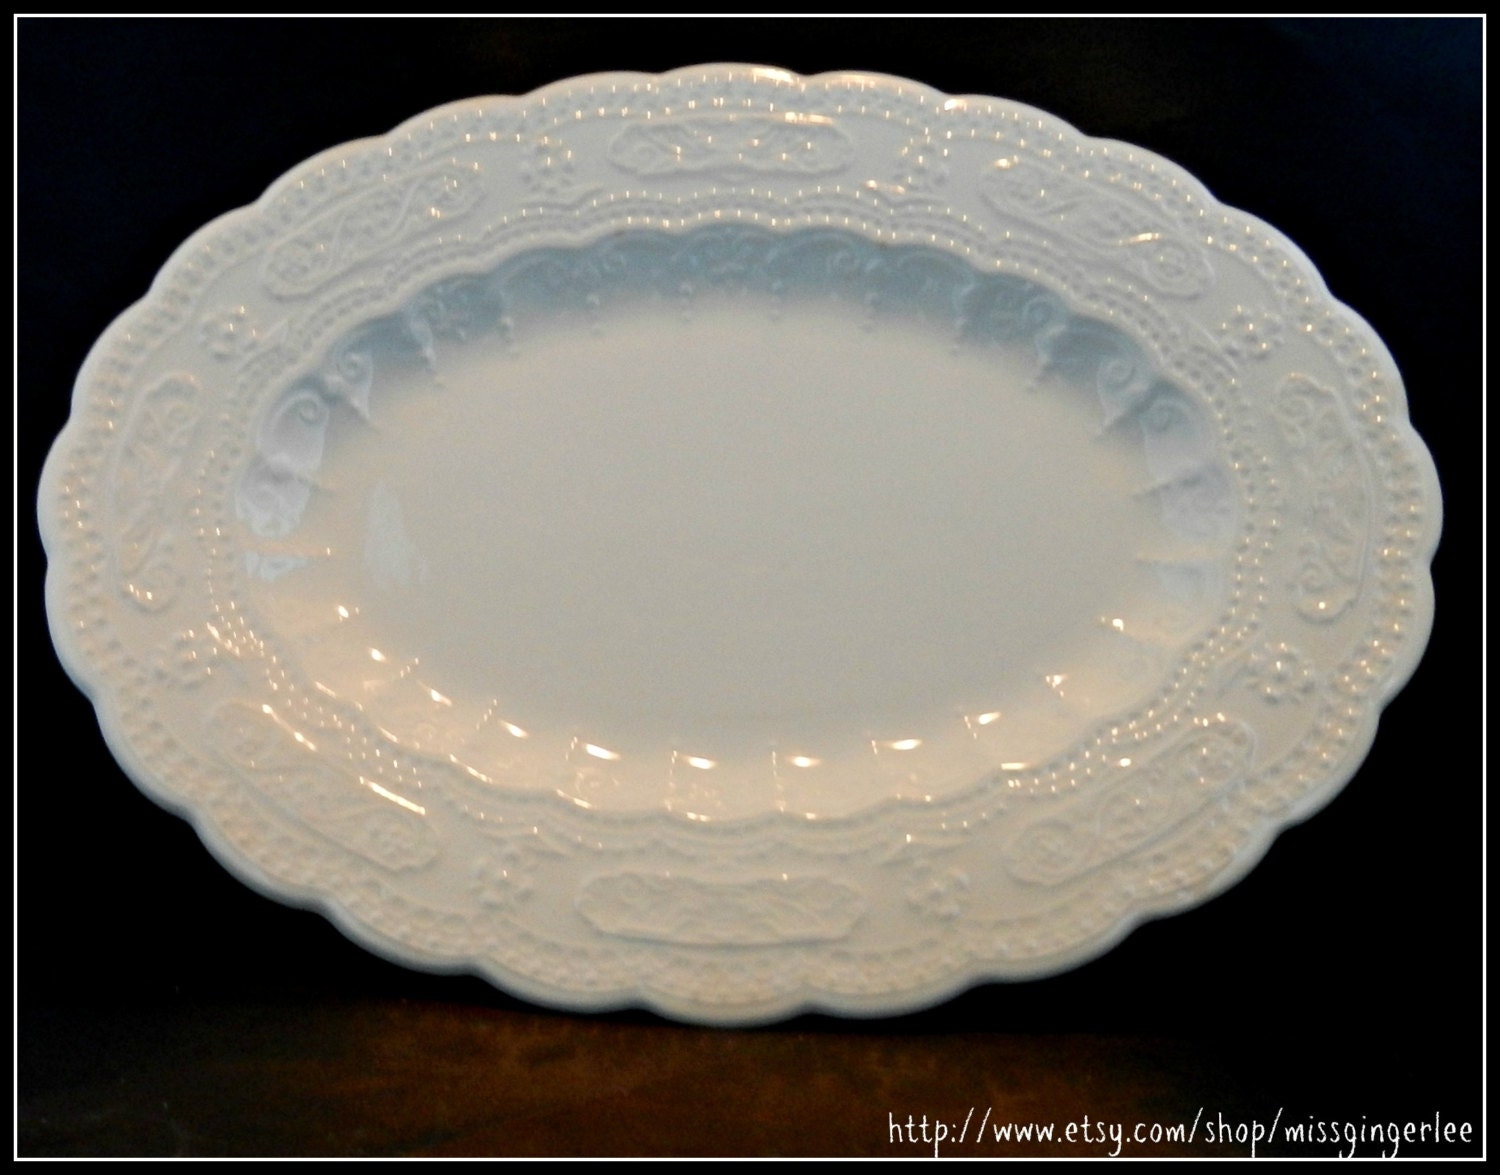 Vintage 1936 Edwin Knowles China large oval Fashion Pattern embossed serving platter with scalloped edges made in USA